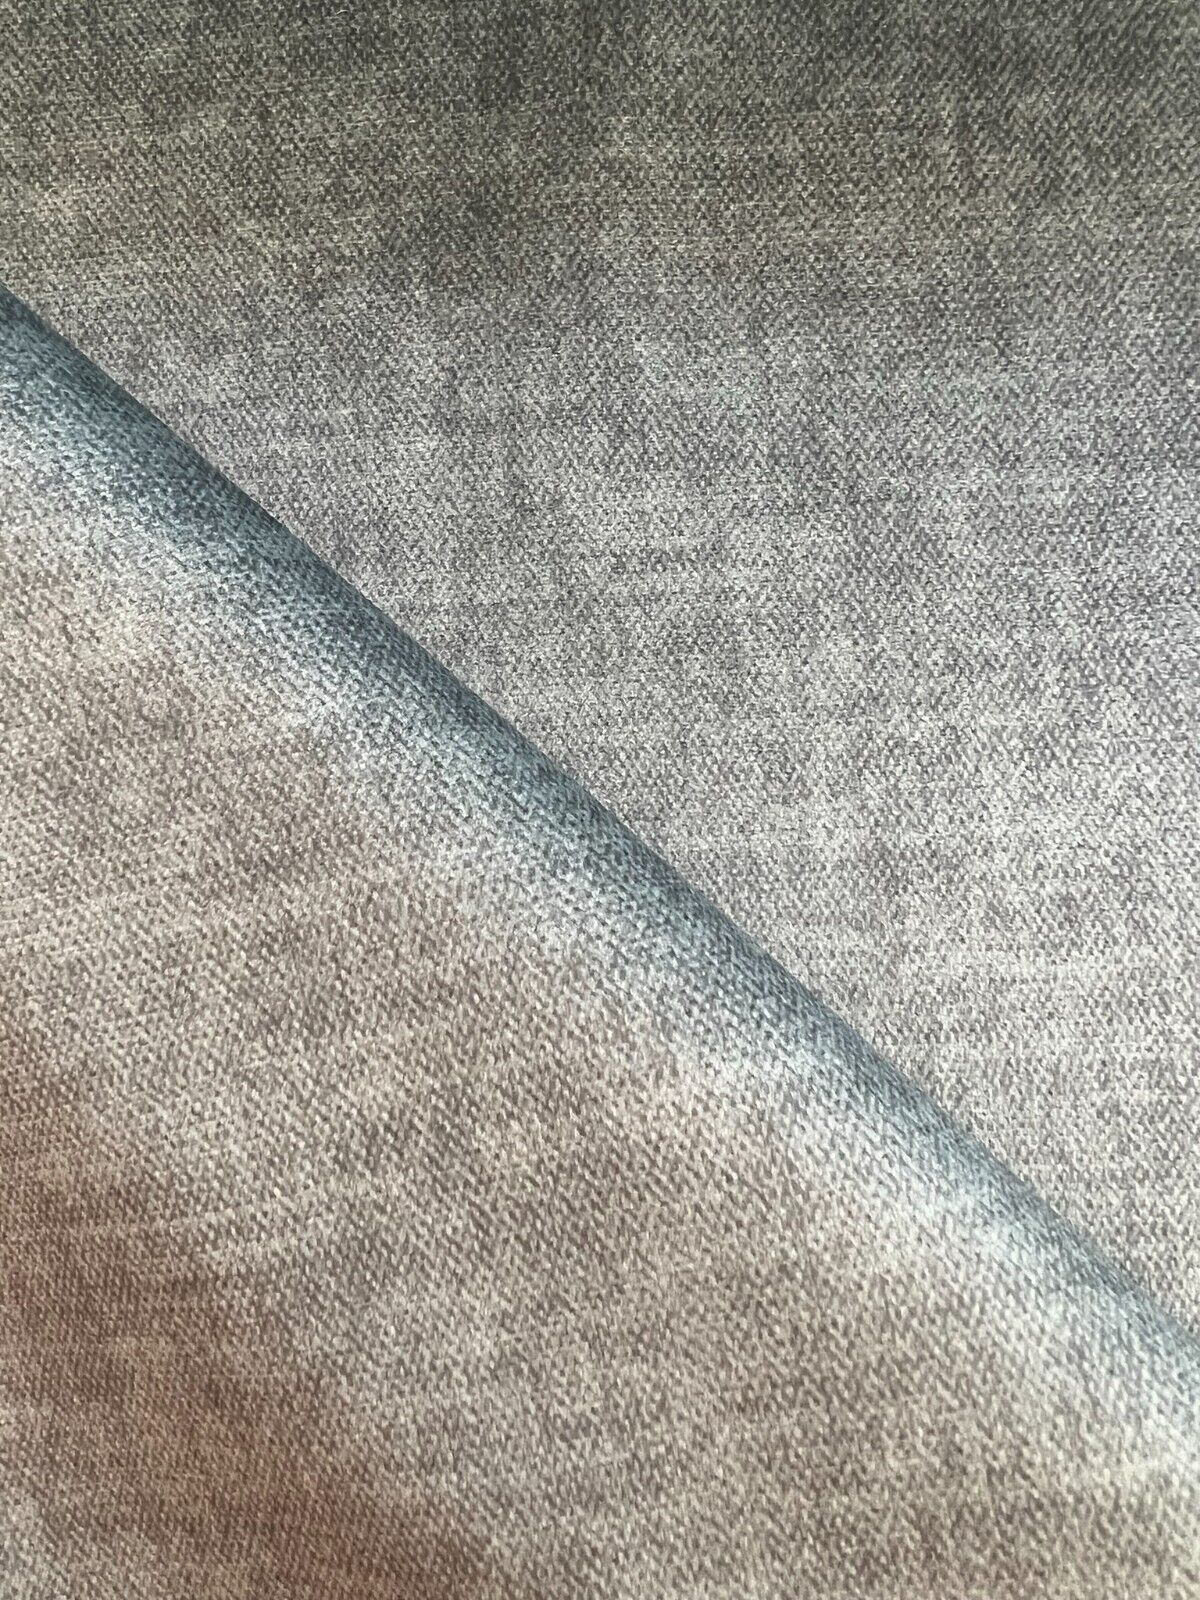  Beautiful Petrol Color Sturdy Velour Fabric approximate 8-10 yards on a Roll